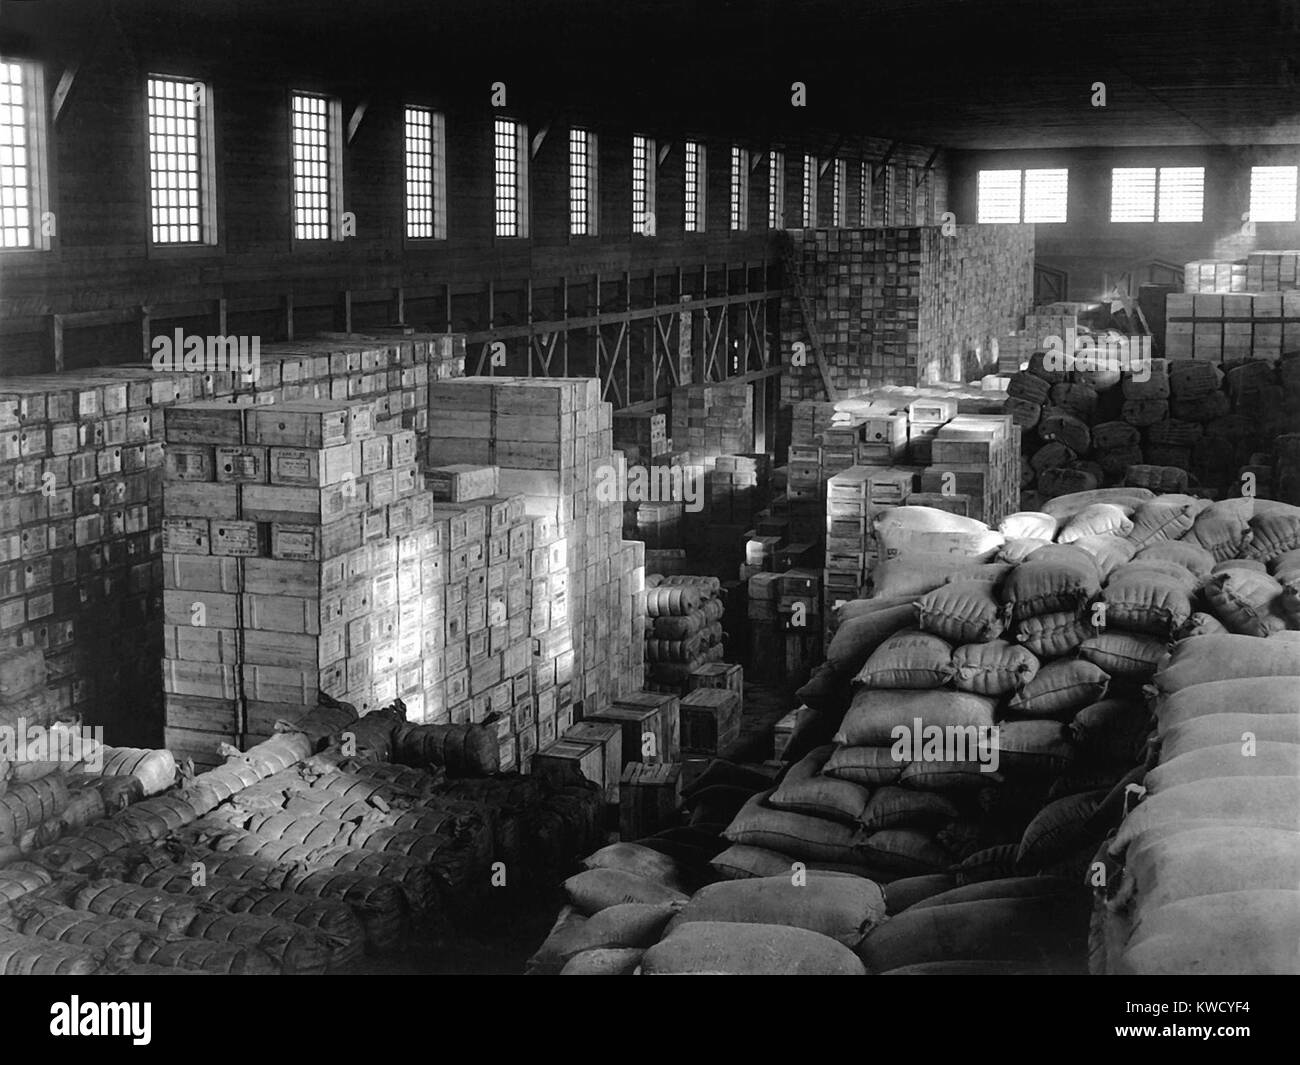 Quartermaster supplies in warehouse at Vladivostok, containing American war material. Protecting this property was one of the missions of the American North Russian Expeditionary Force 1918-1920. After the fall of Czarist Russia, a billion dollars worth of American guns and equipment were abandoned along the Trans-Siberian Railway between Vladivostok and Nikolsk (Ussuriysk) (BSLOC 2017 2 14) Stock Photo